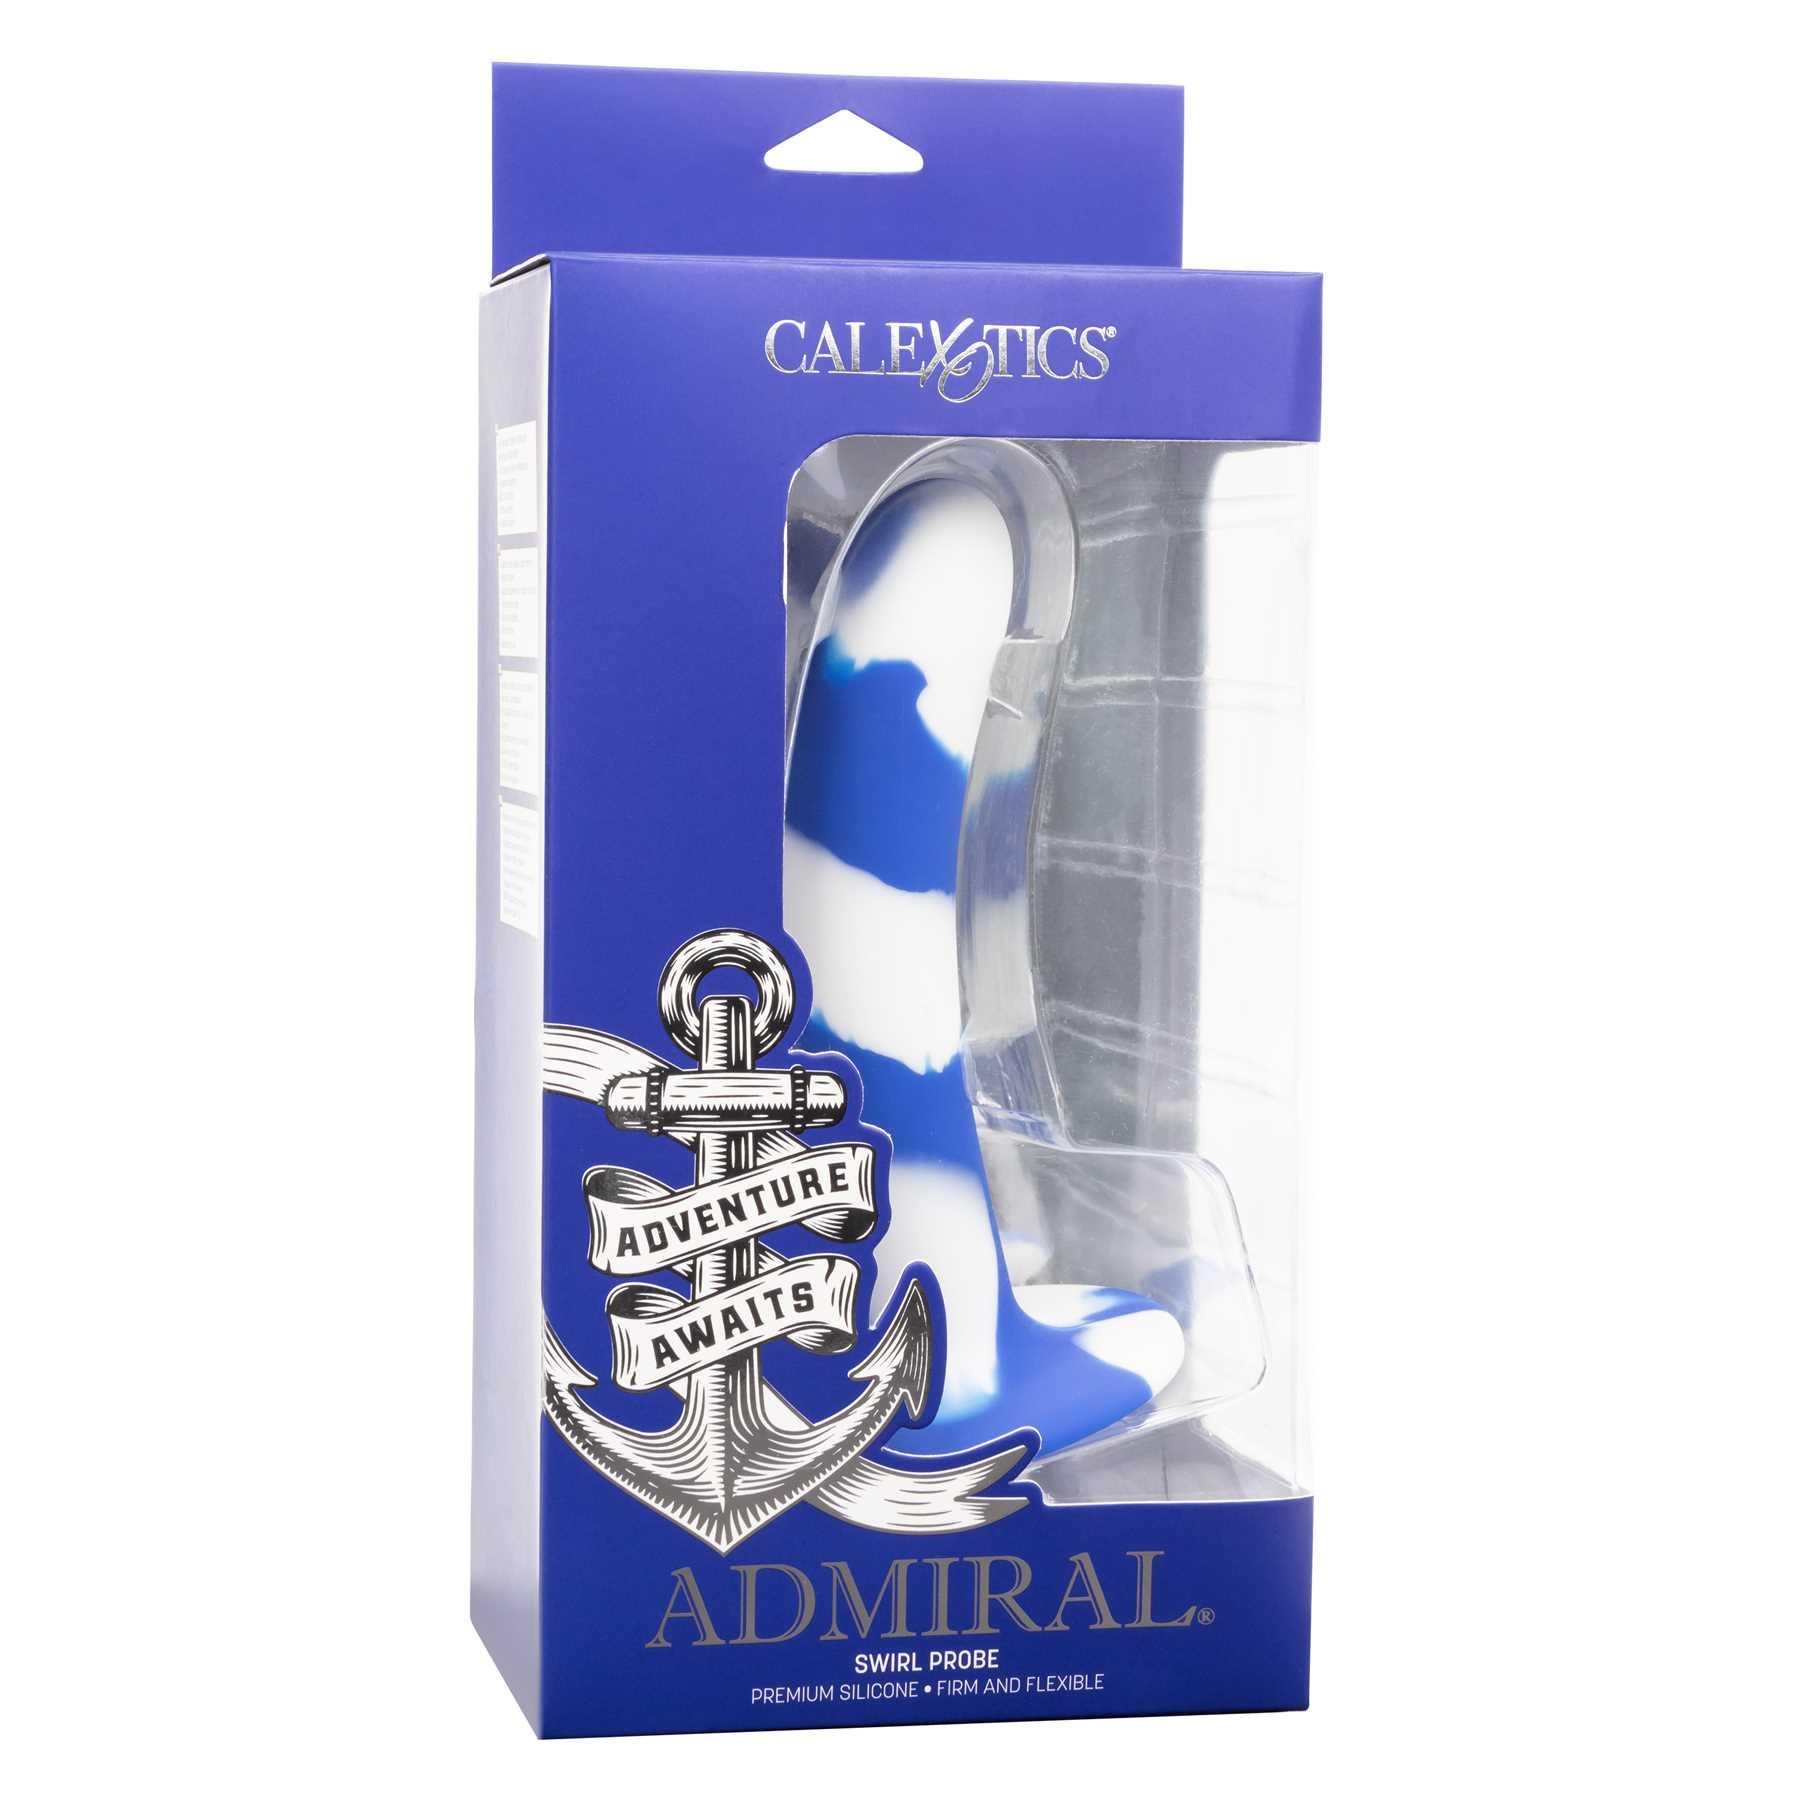 Admiral Swirl Anal Probe packaging